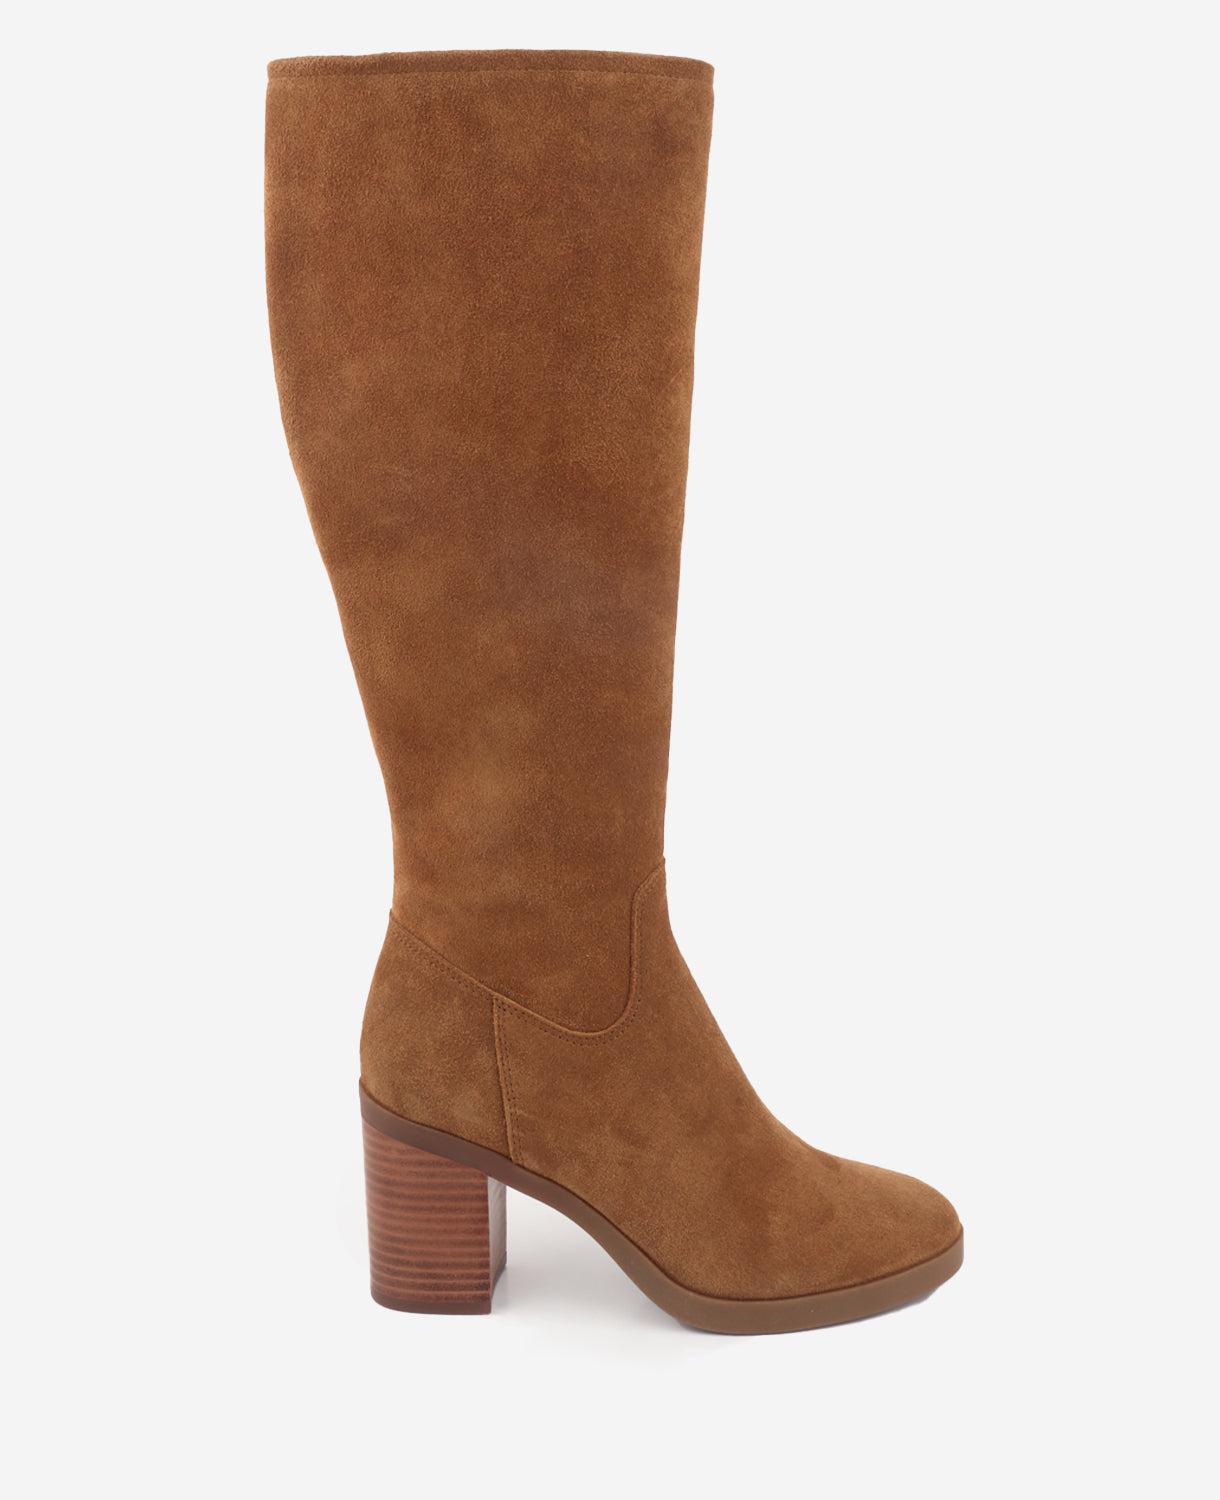 Kenneth Cole New York Veronica Knee High Boot Product Image